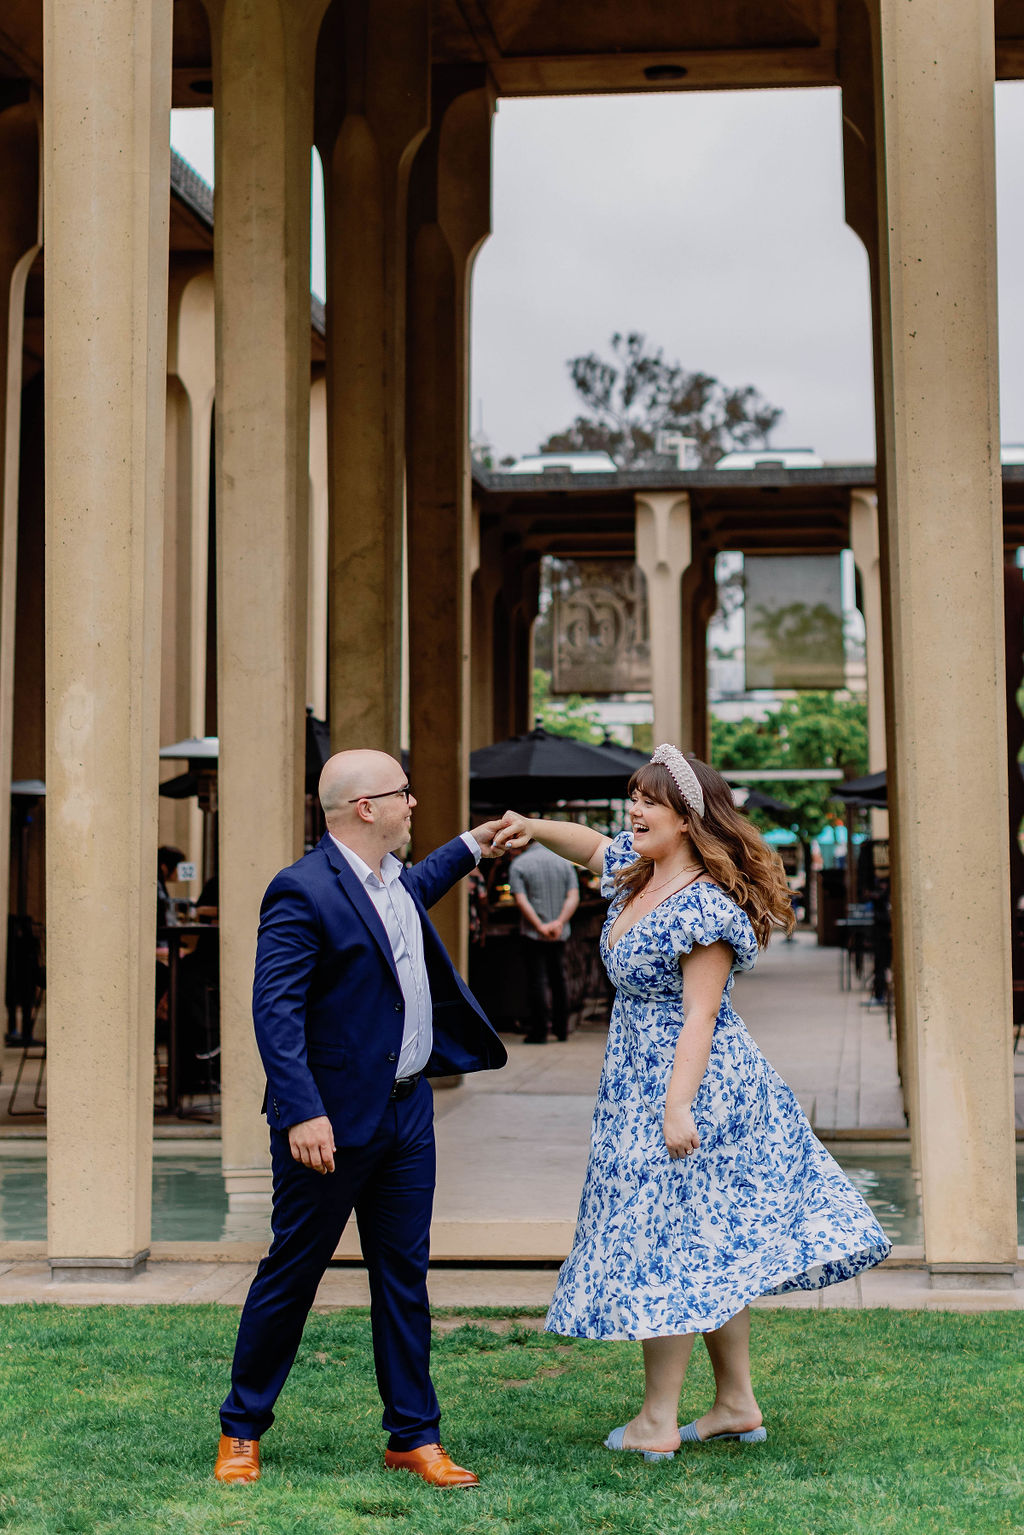 Engagement photo of Jimmy and Hannah  dancing and Jimmy is twirling her at San Diego Museum of art. |Photo by California Photographer Sarah Block Photography